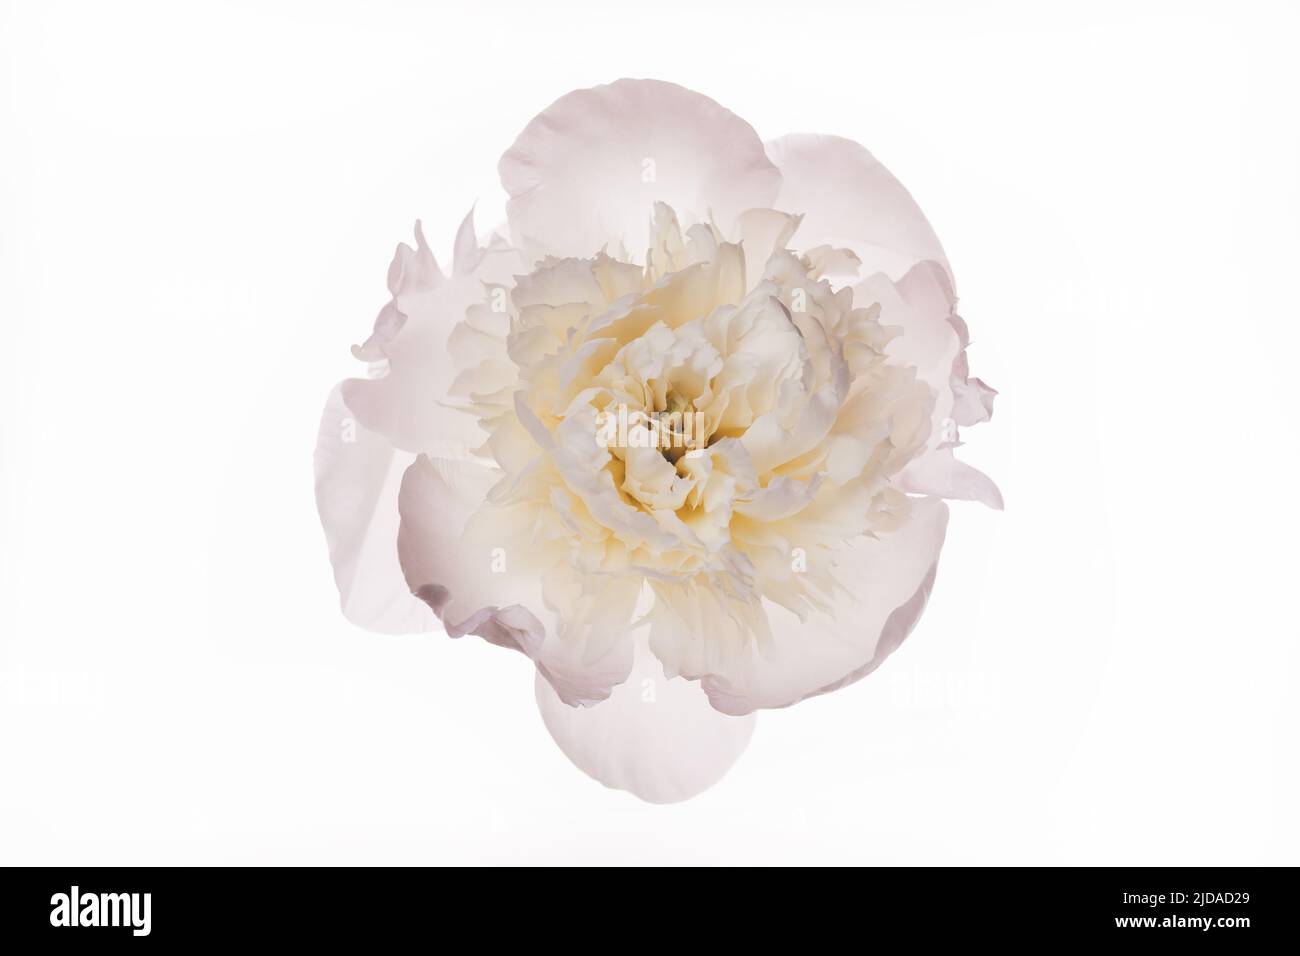 Beautiful white open peony flower isolated on white. Holiday, wedding, love, birthday design. Natural floral background Stock Photo